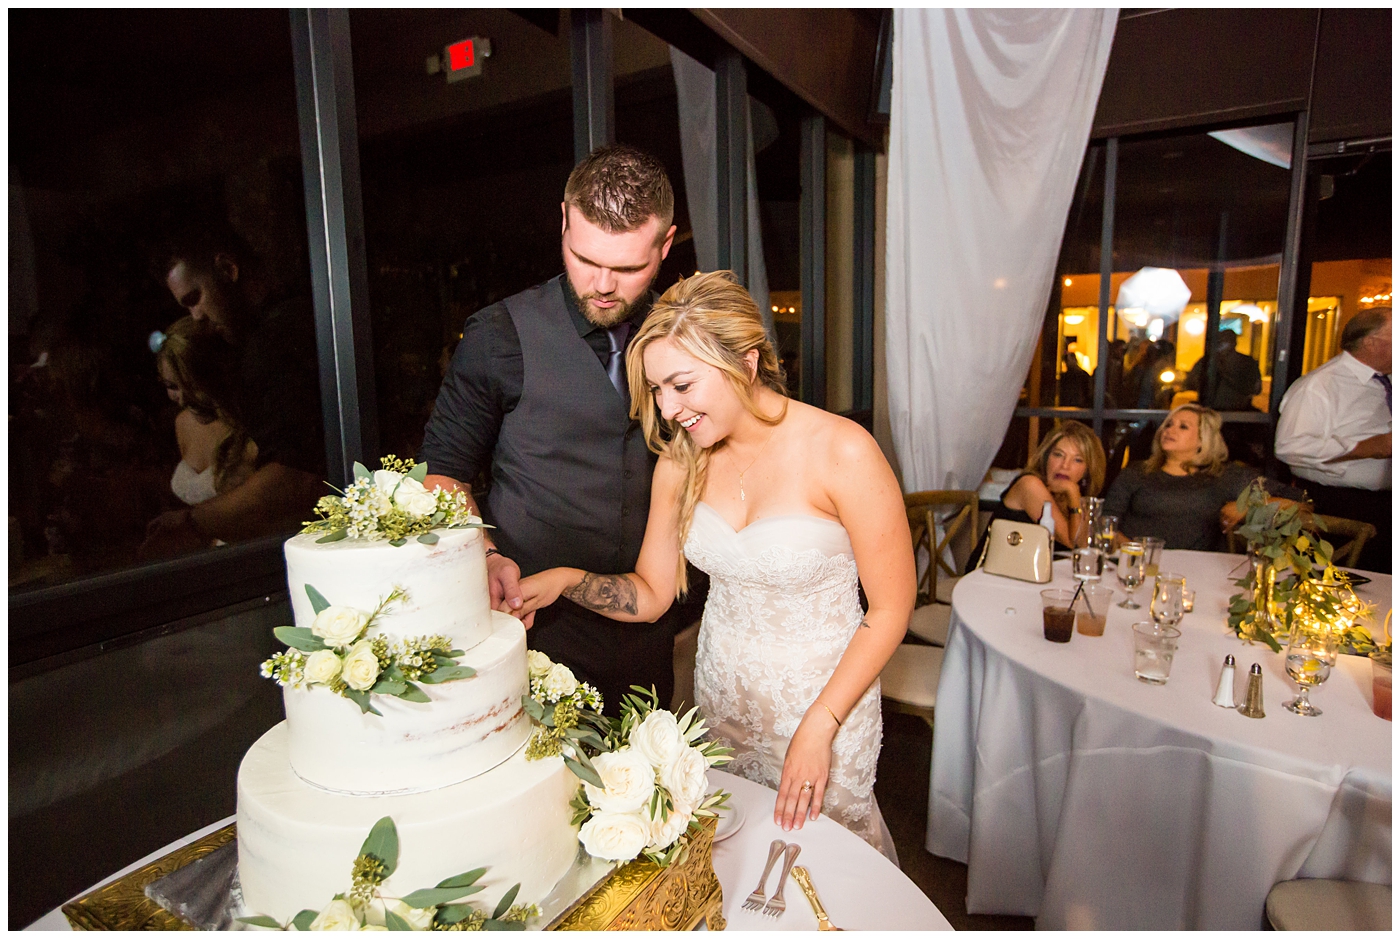 bride with fishtail braid and strapless dress with white rose and greenery bouquet with groom in black pants and vest and tie with rolled up shirt sleeves with succulent boutonniere wedding day portrait at reception cake cutting